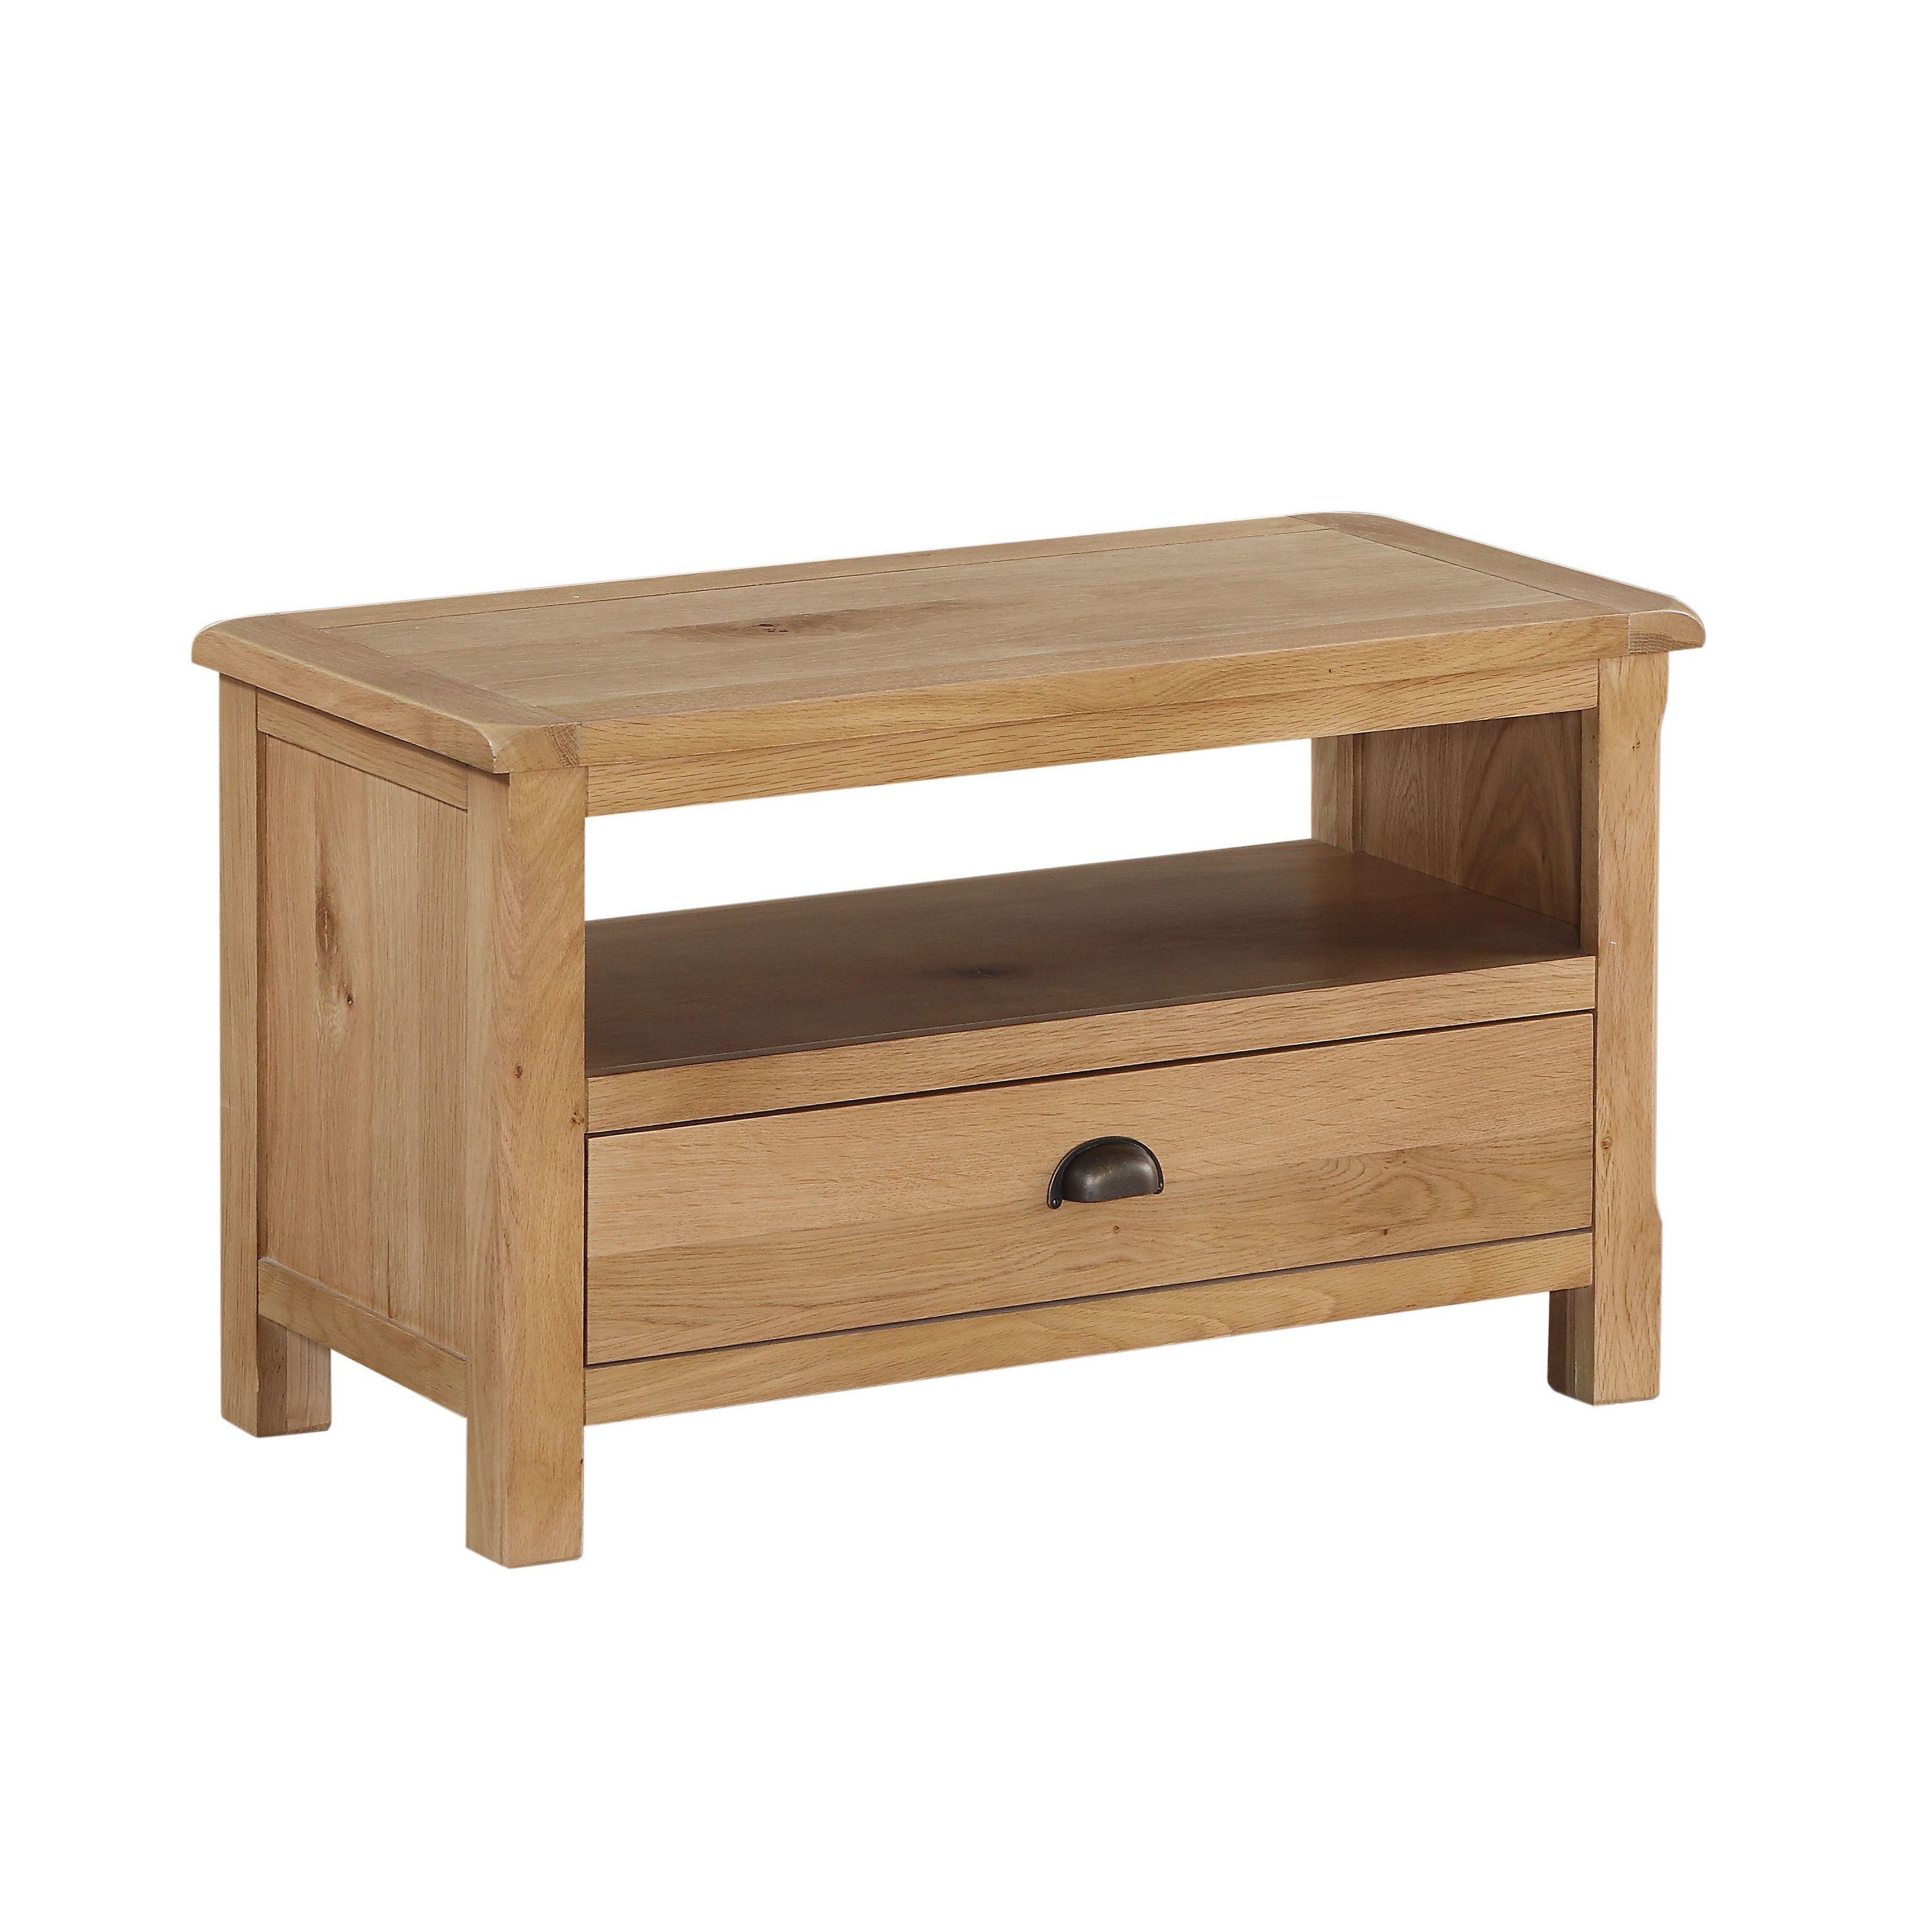 Fashionable Oak Furniture Tv Stands Throughout Dark Oak Tv Stand (View 19 of 20)